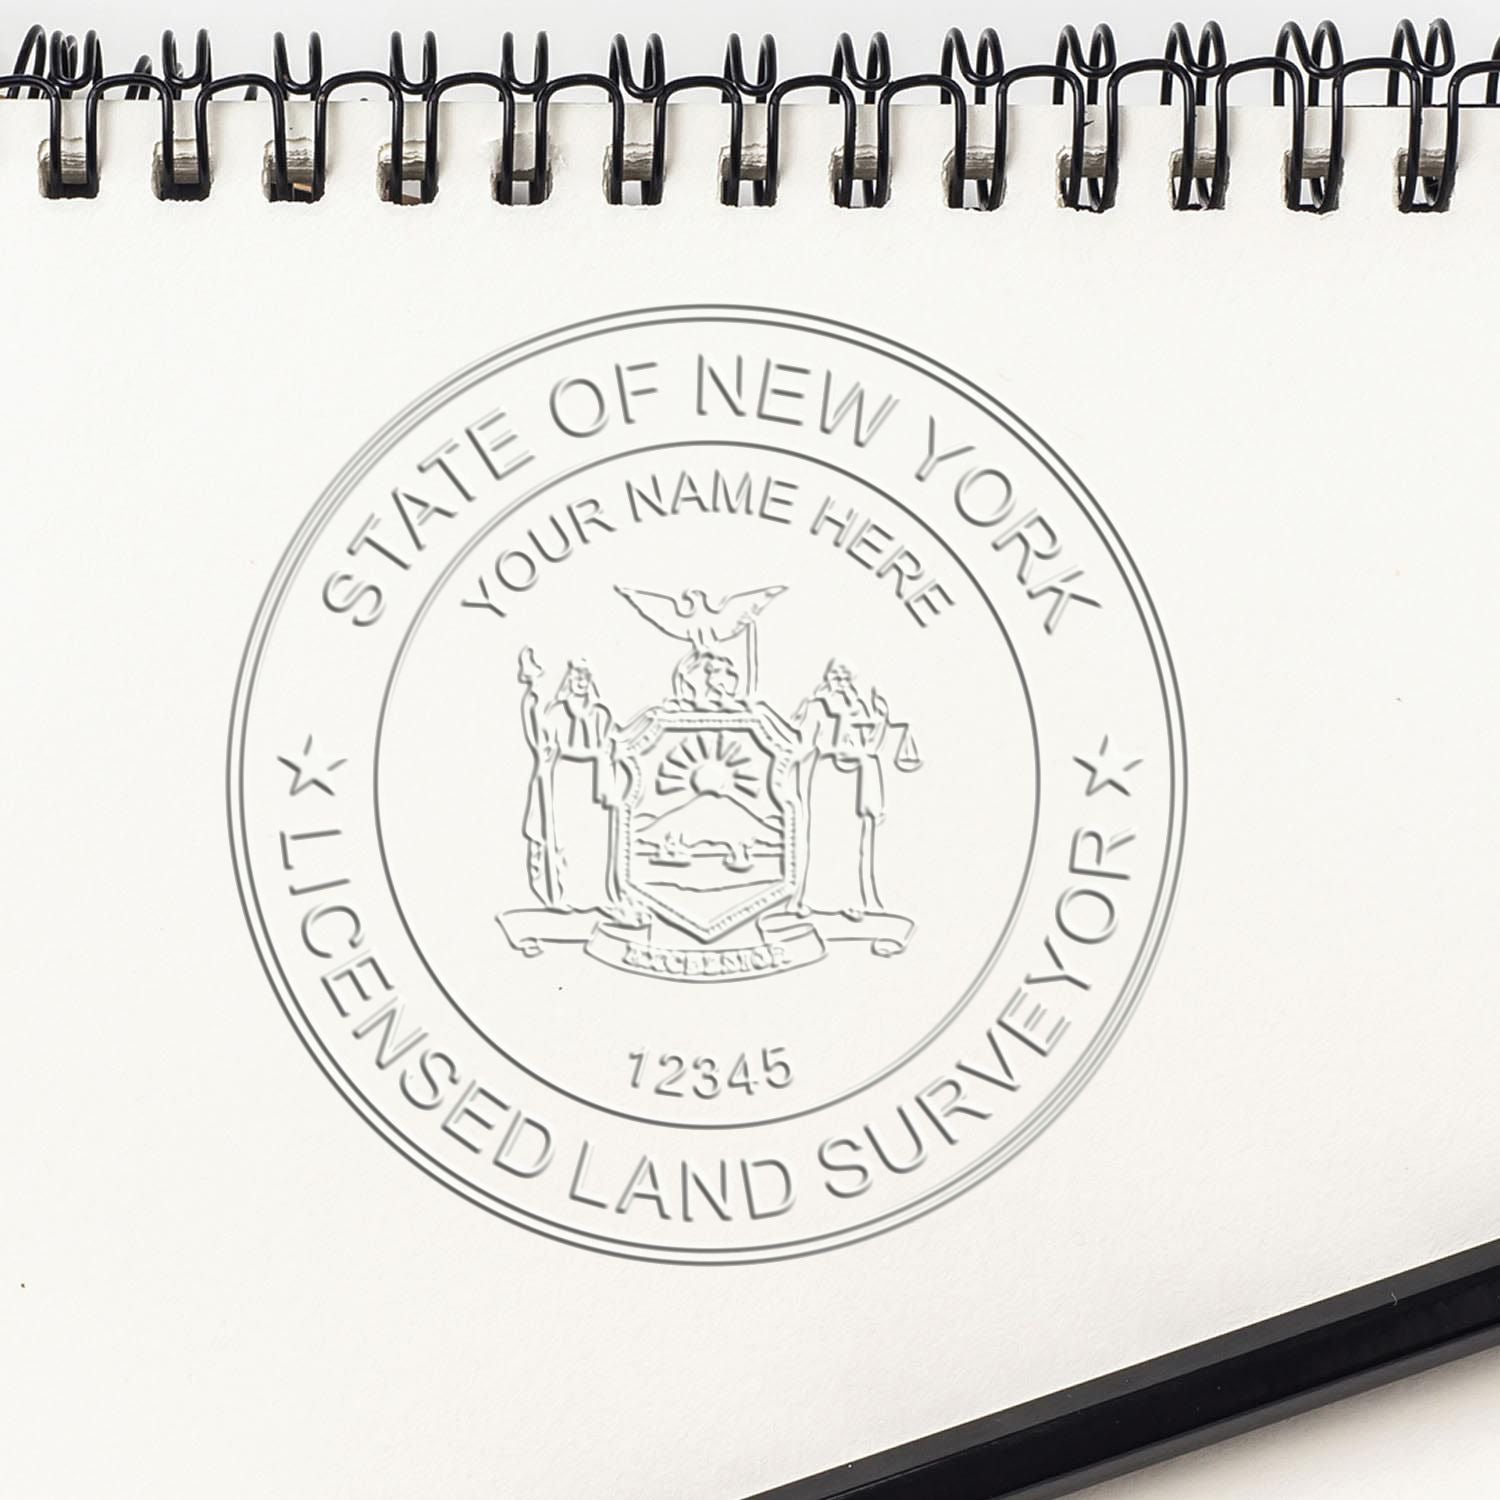 A lifestyle photo showing a stamped image of the New York Desk Surveyor Seal Embosser on a piece of paper